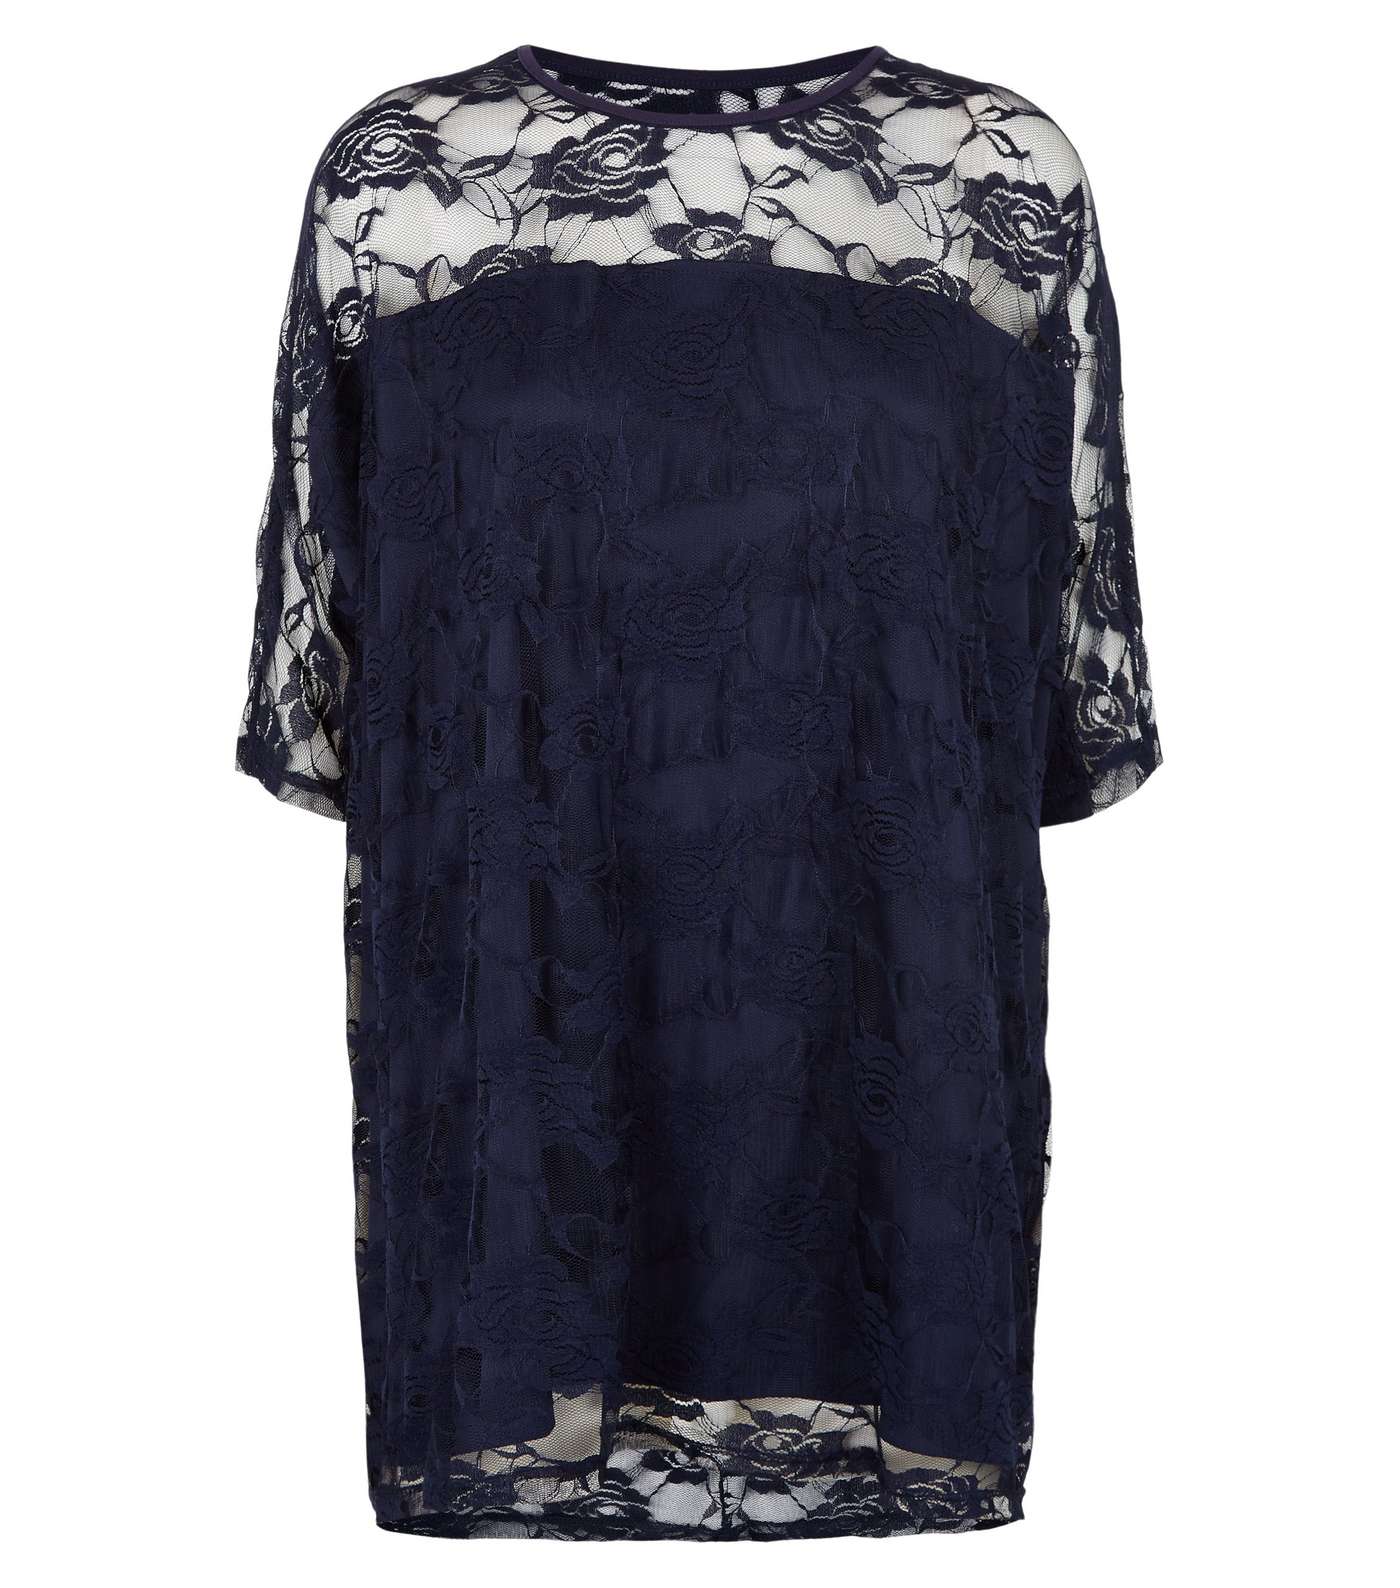 Mela Curves Navy Lace Overlay Top Image 4